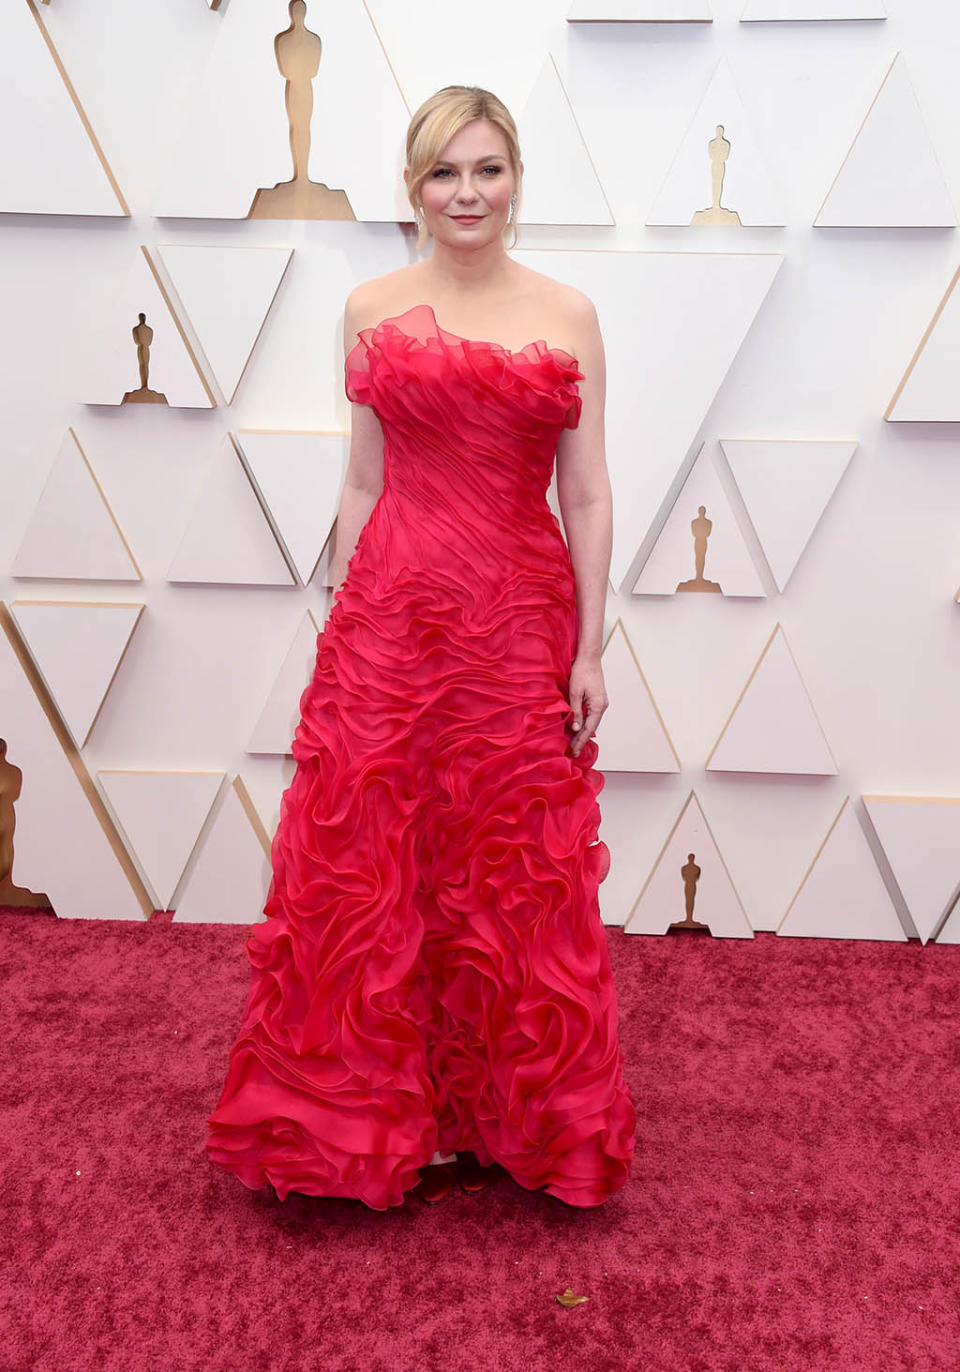 Kirsten Dunst arrives at the 94th Academy Awards held at Dolby Theatre in Los Angeles on March 27th, 2022. - Credit: Gilbert Flores for Variety